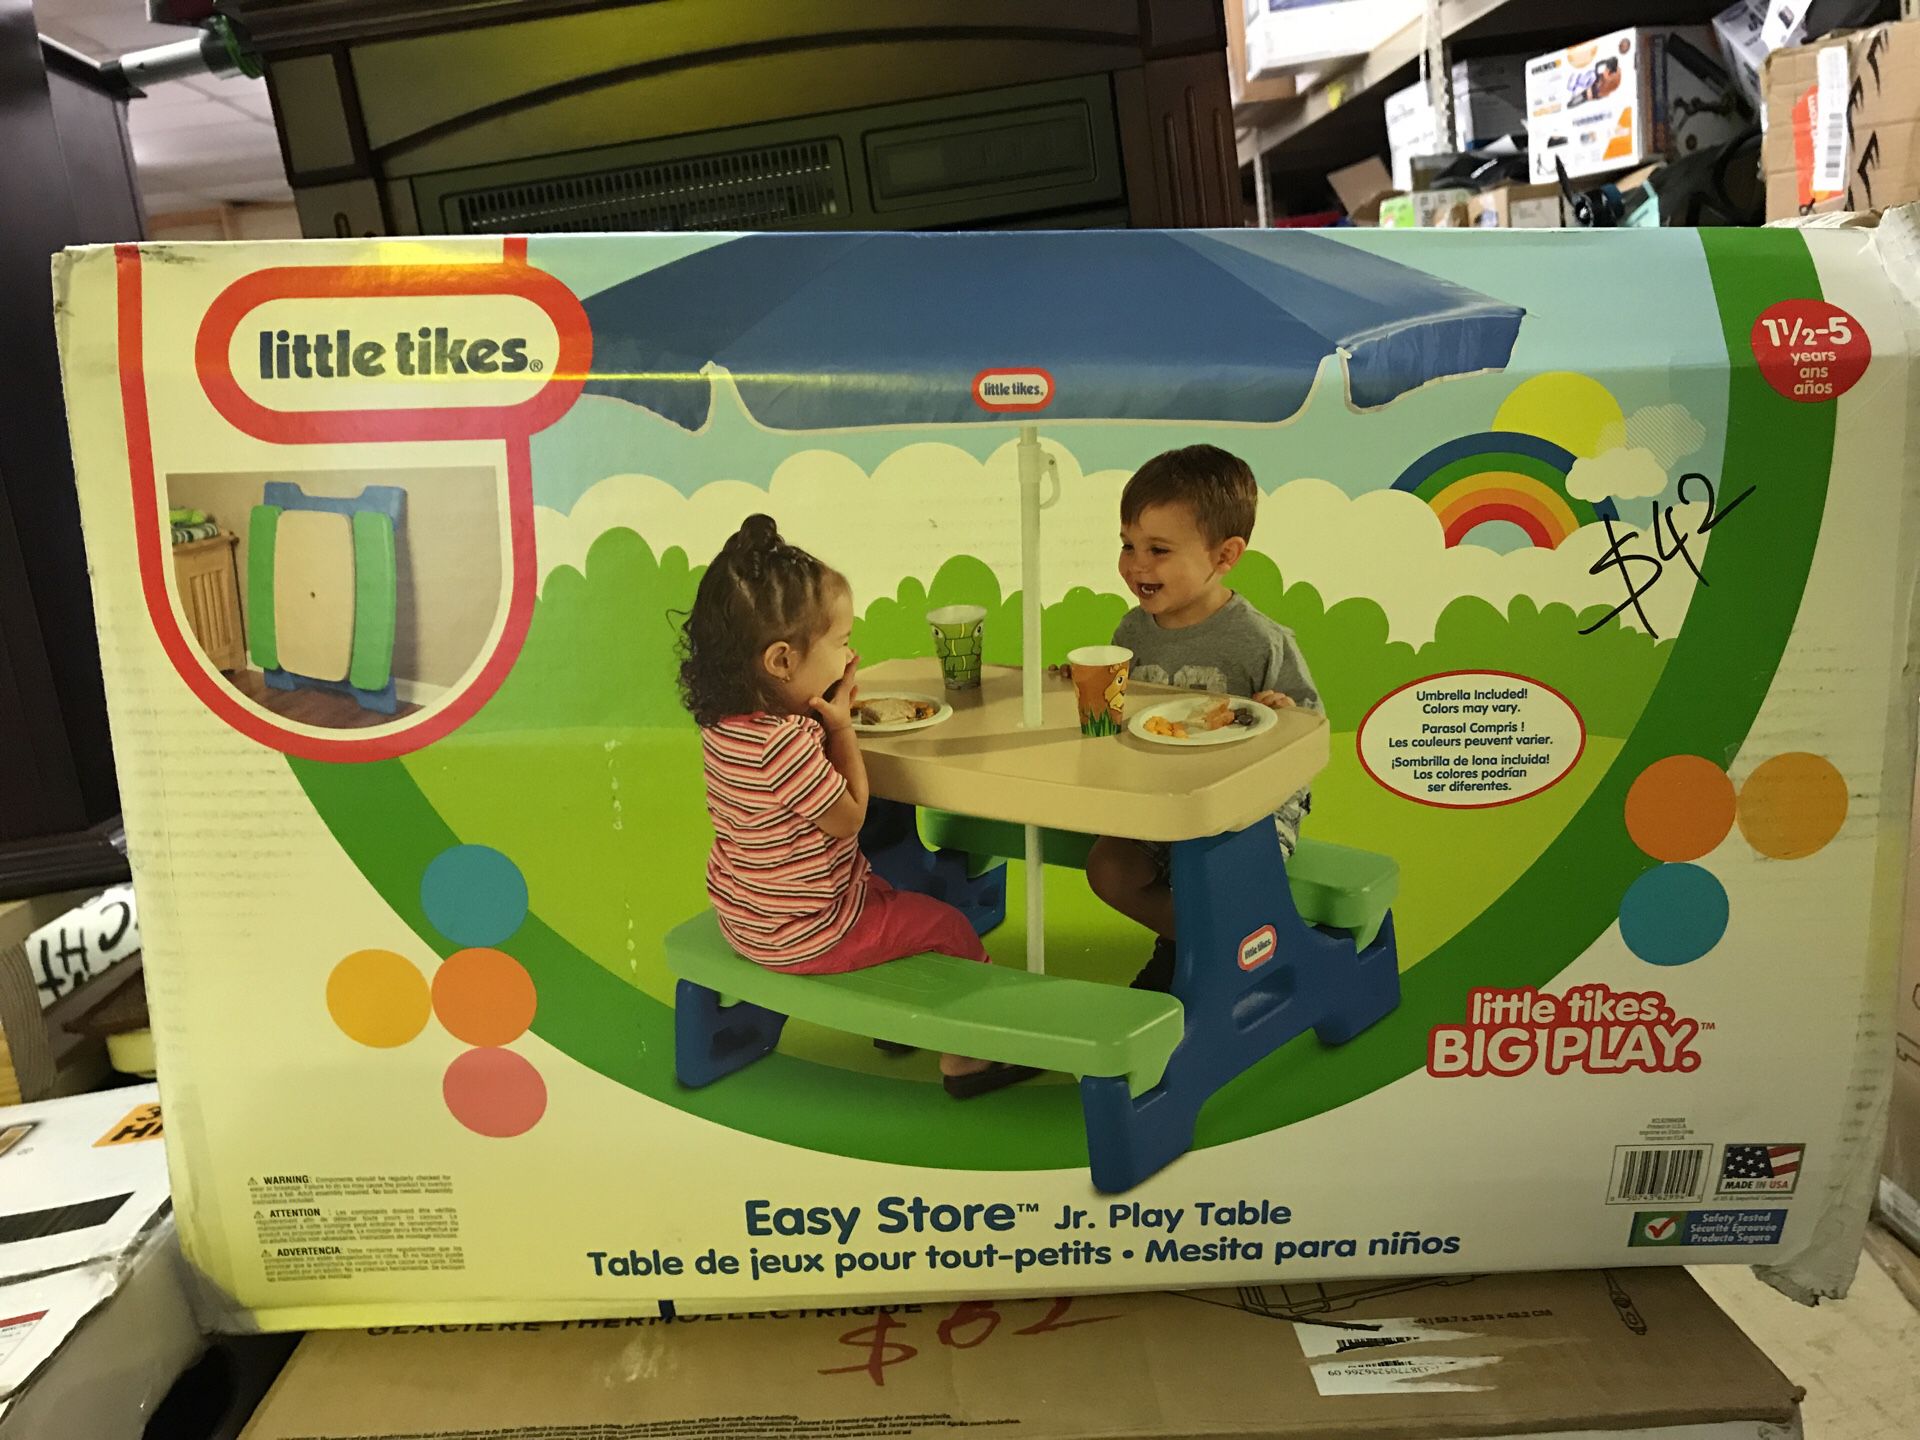 Little times Play Table